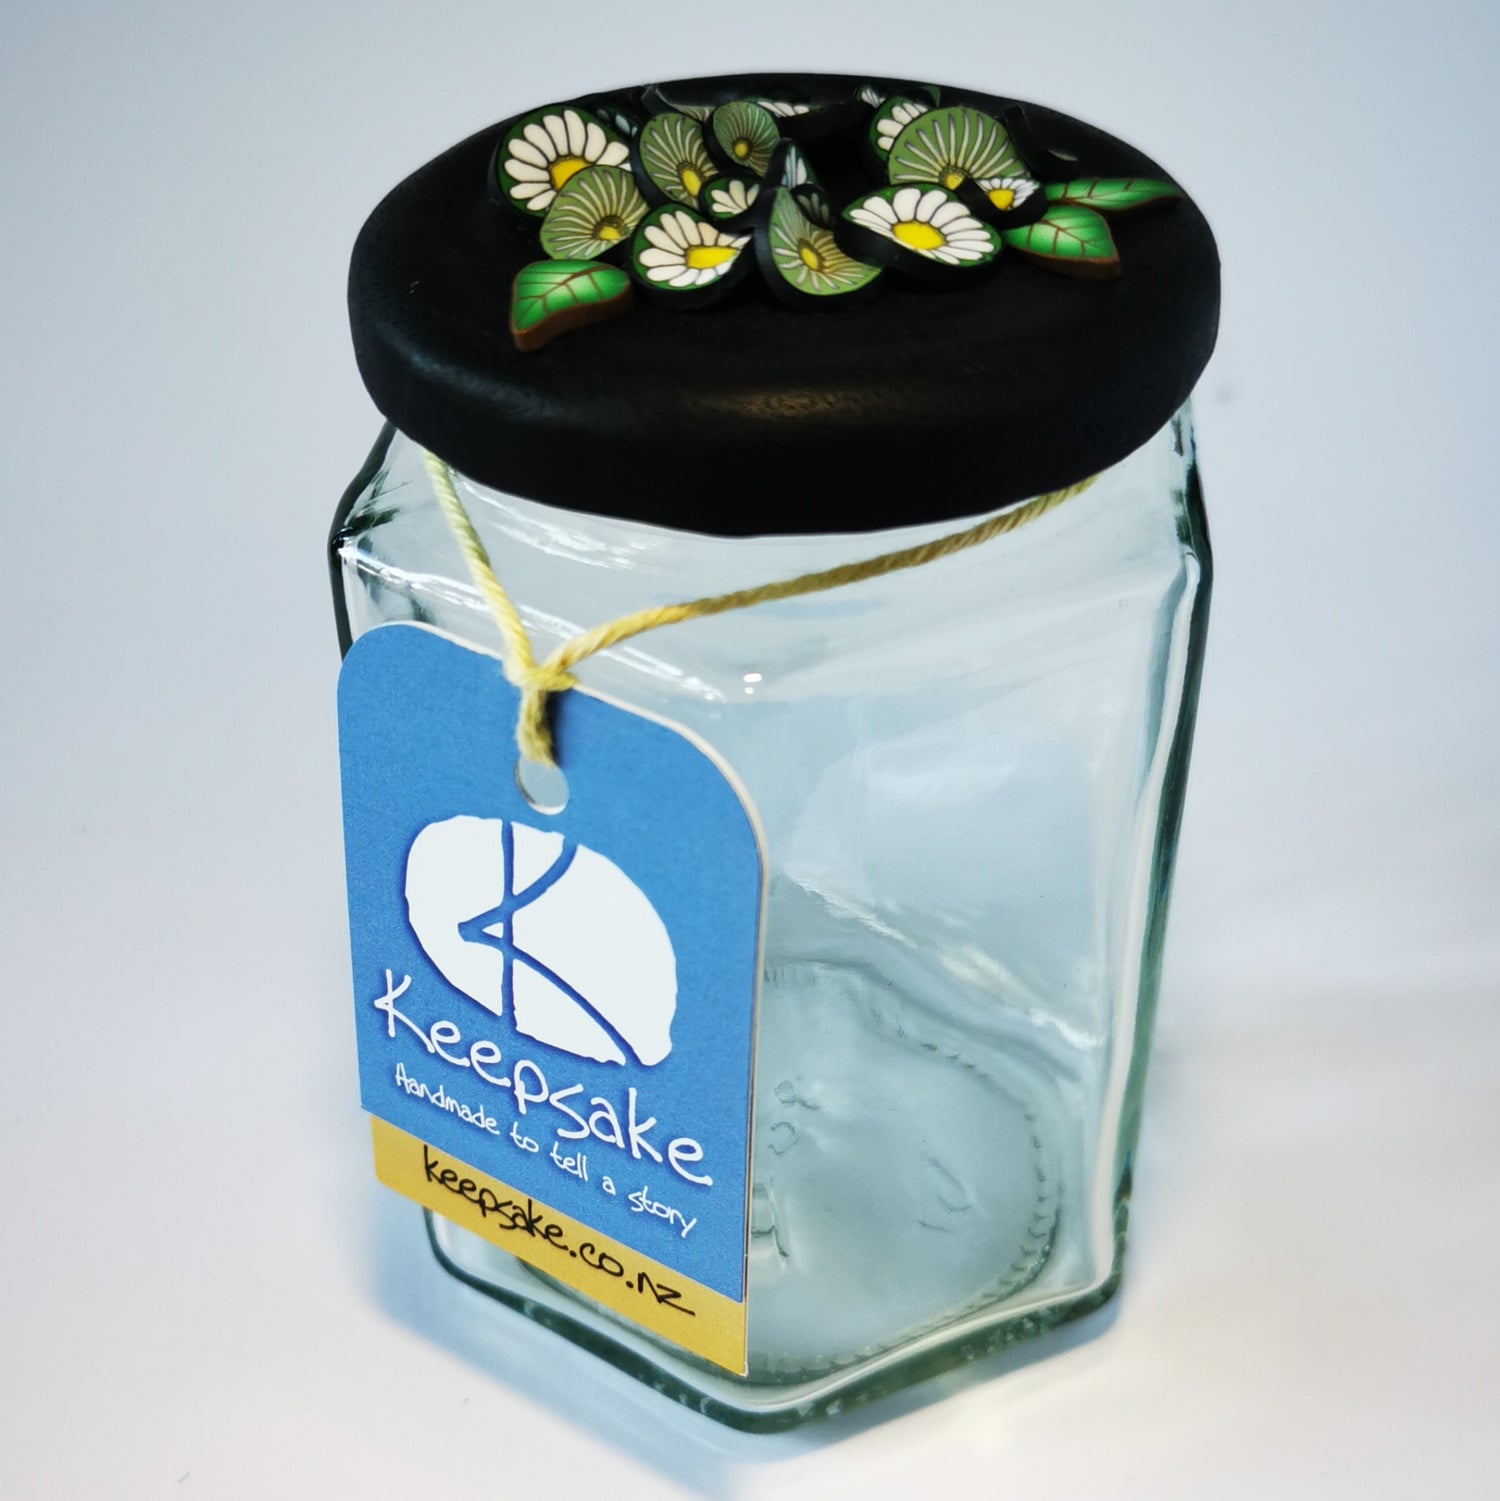 270ml glass hexagonal  jar and lid hand-decorated in New Zealand, with  an air-tight lid decorated with polymer clay daisies in a daisy chain. Ready to be filled with fudge, sweets or other treasures.